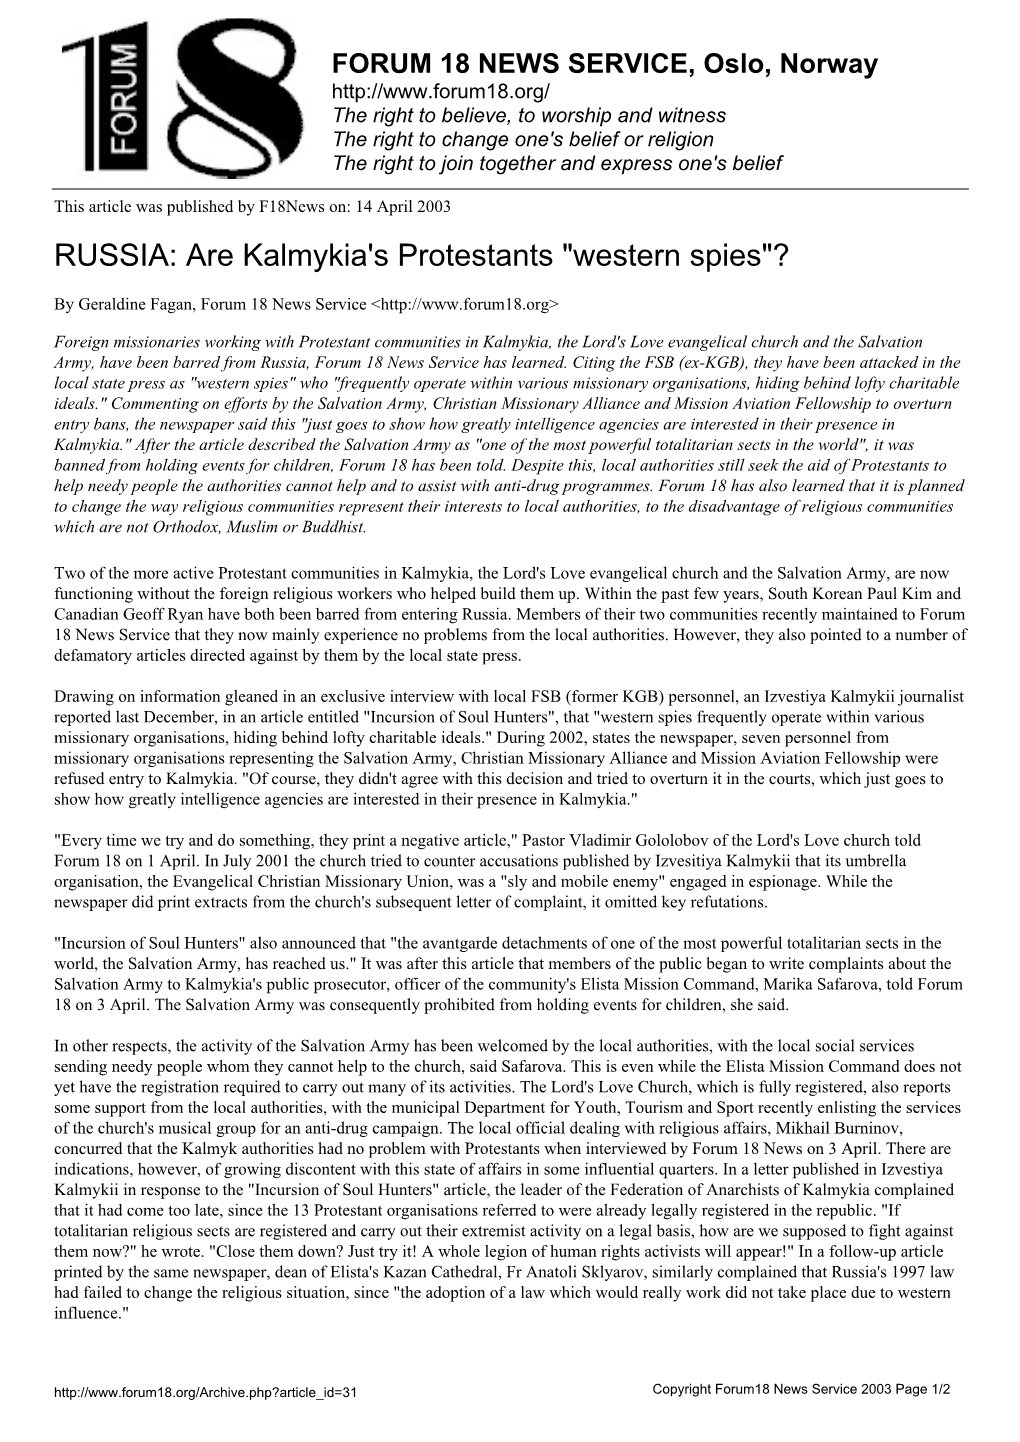 Are Kalmykia's Protestants "Western Spies"?